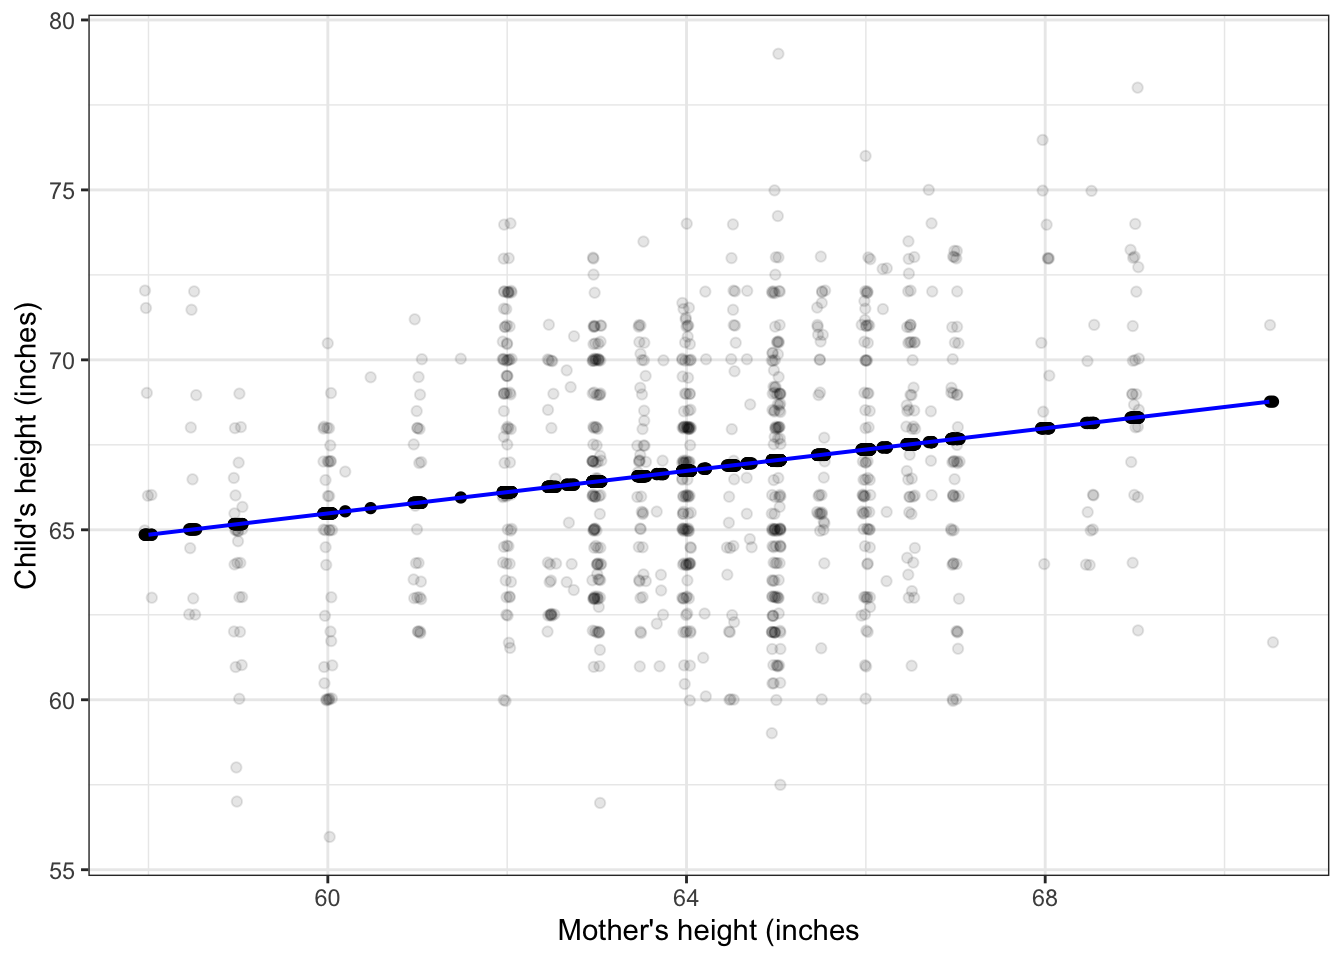 Figure 5.5: Model values (blue dots) for a straight-line model of child’s height with mother’s height as the explanatory variable. Response variance: 12.84; Model value variance: 0.52